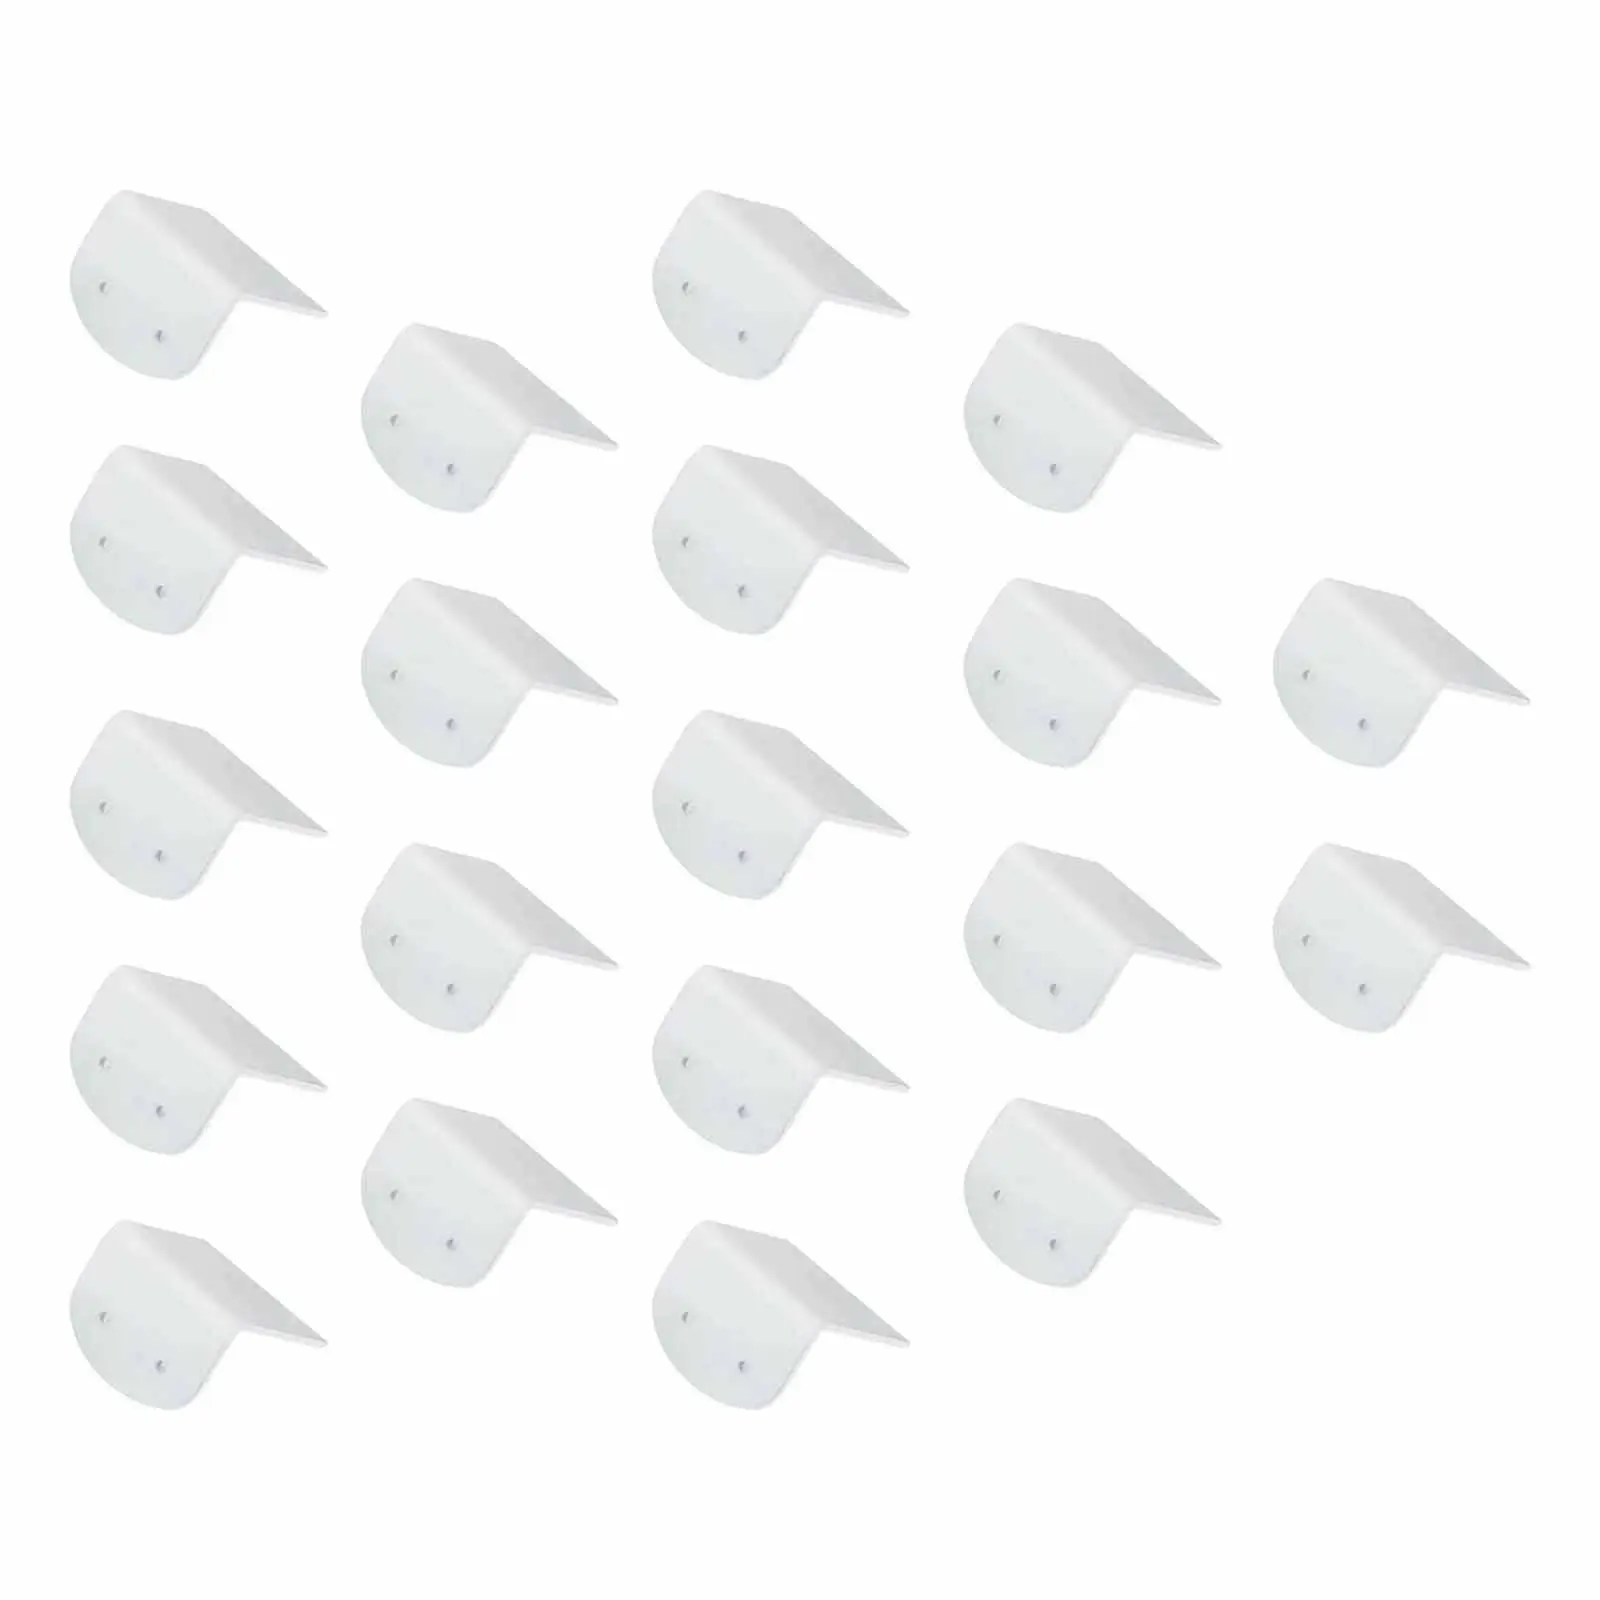 20x Hanging Earring Cards Durable White Carrying Ear Studs Holder Jewelry Packaging Acrylic for store Selling Salon Shop